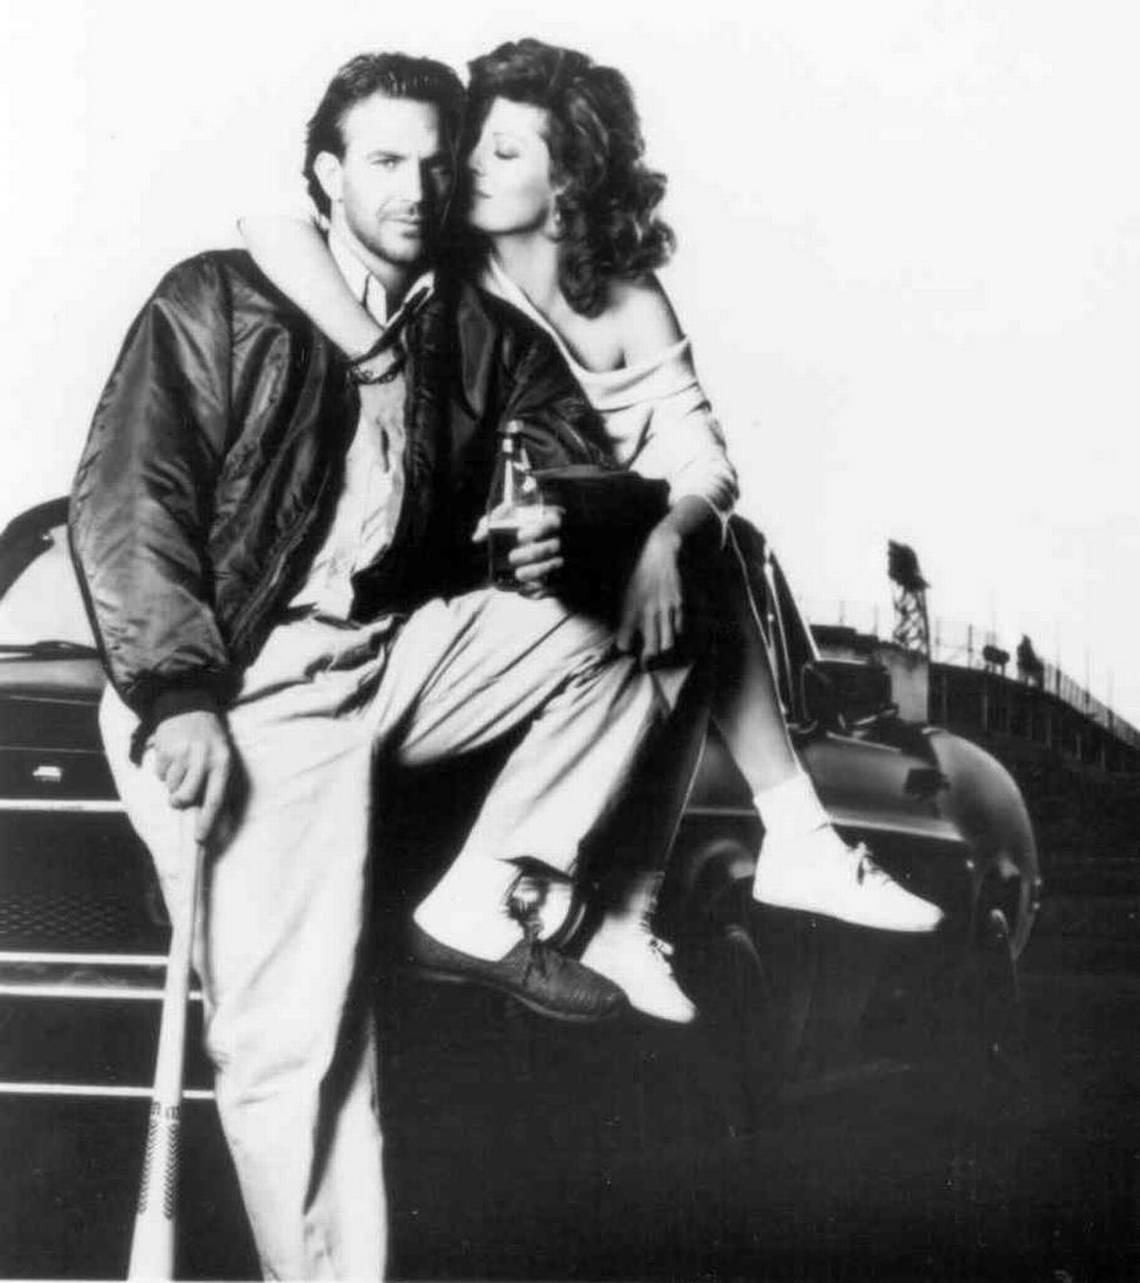 Kevin Costner and Susan Sarandon in a promotional photo for the movie “Bull Durham,” which was shot at the Durham Athletic Park and released in 1988.